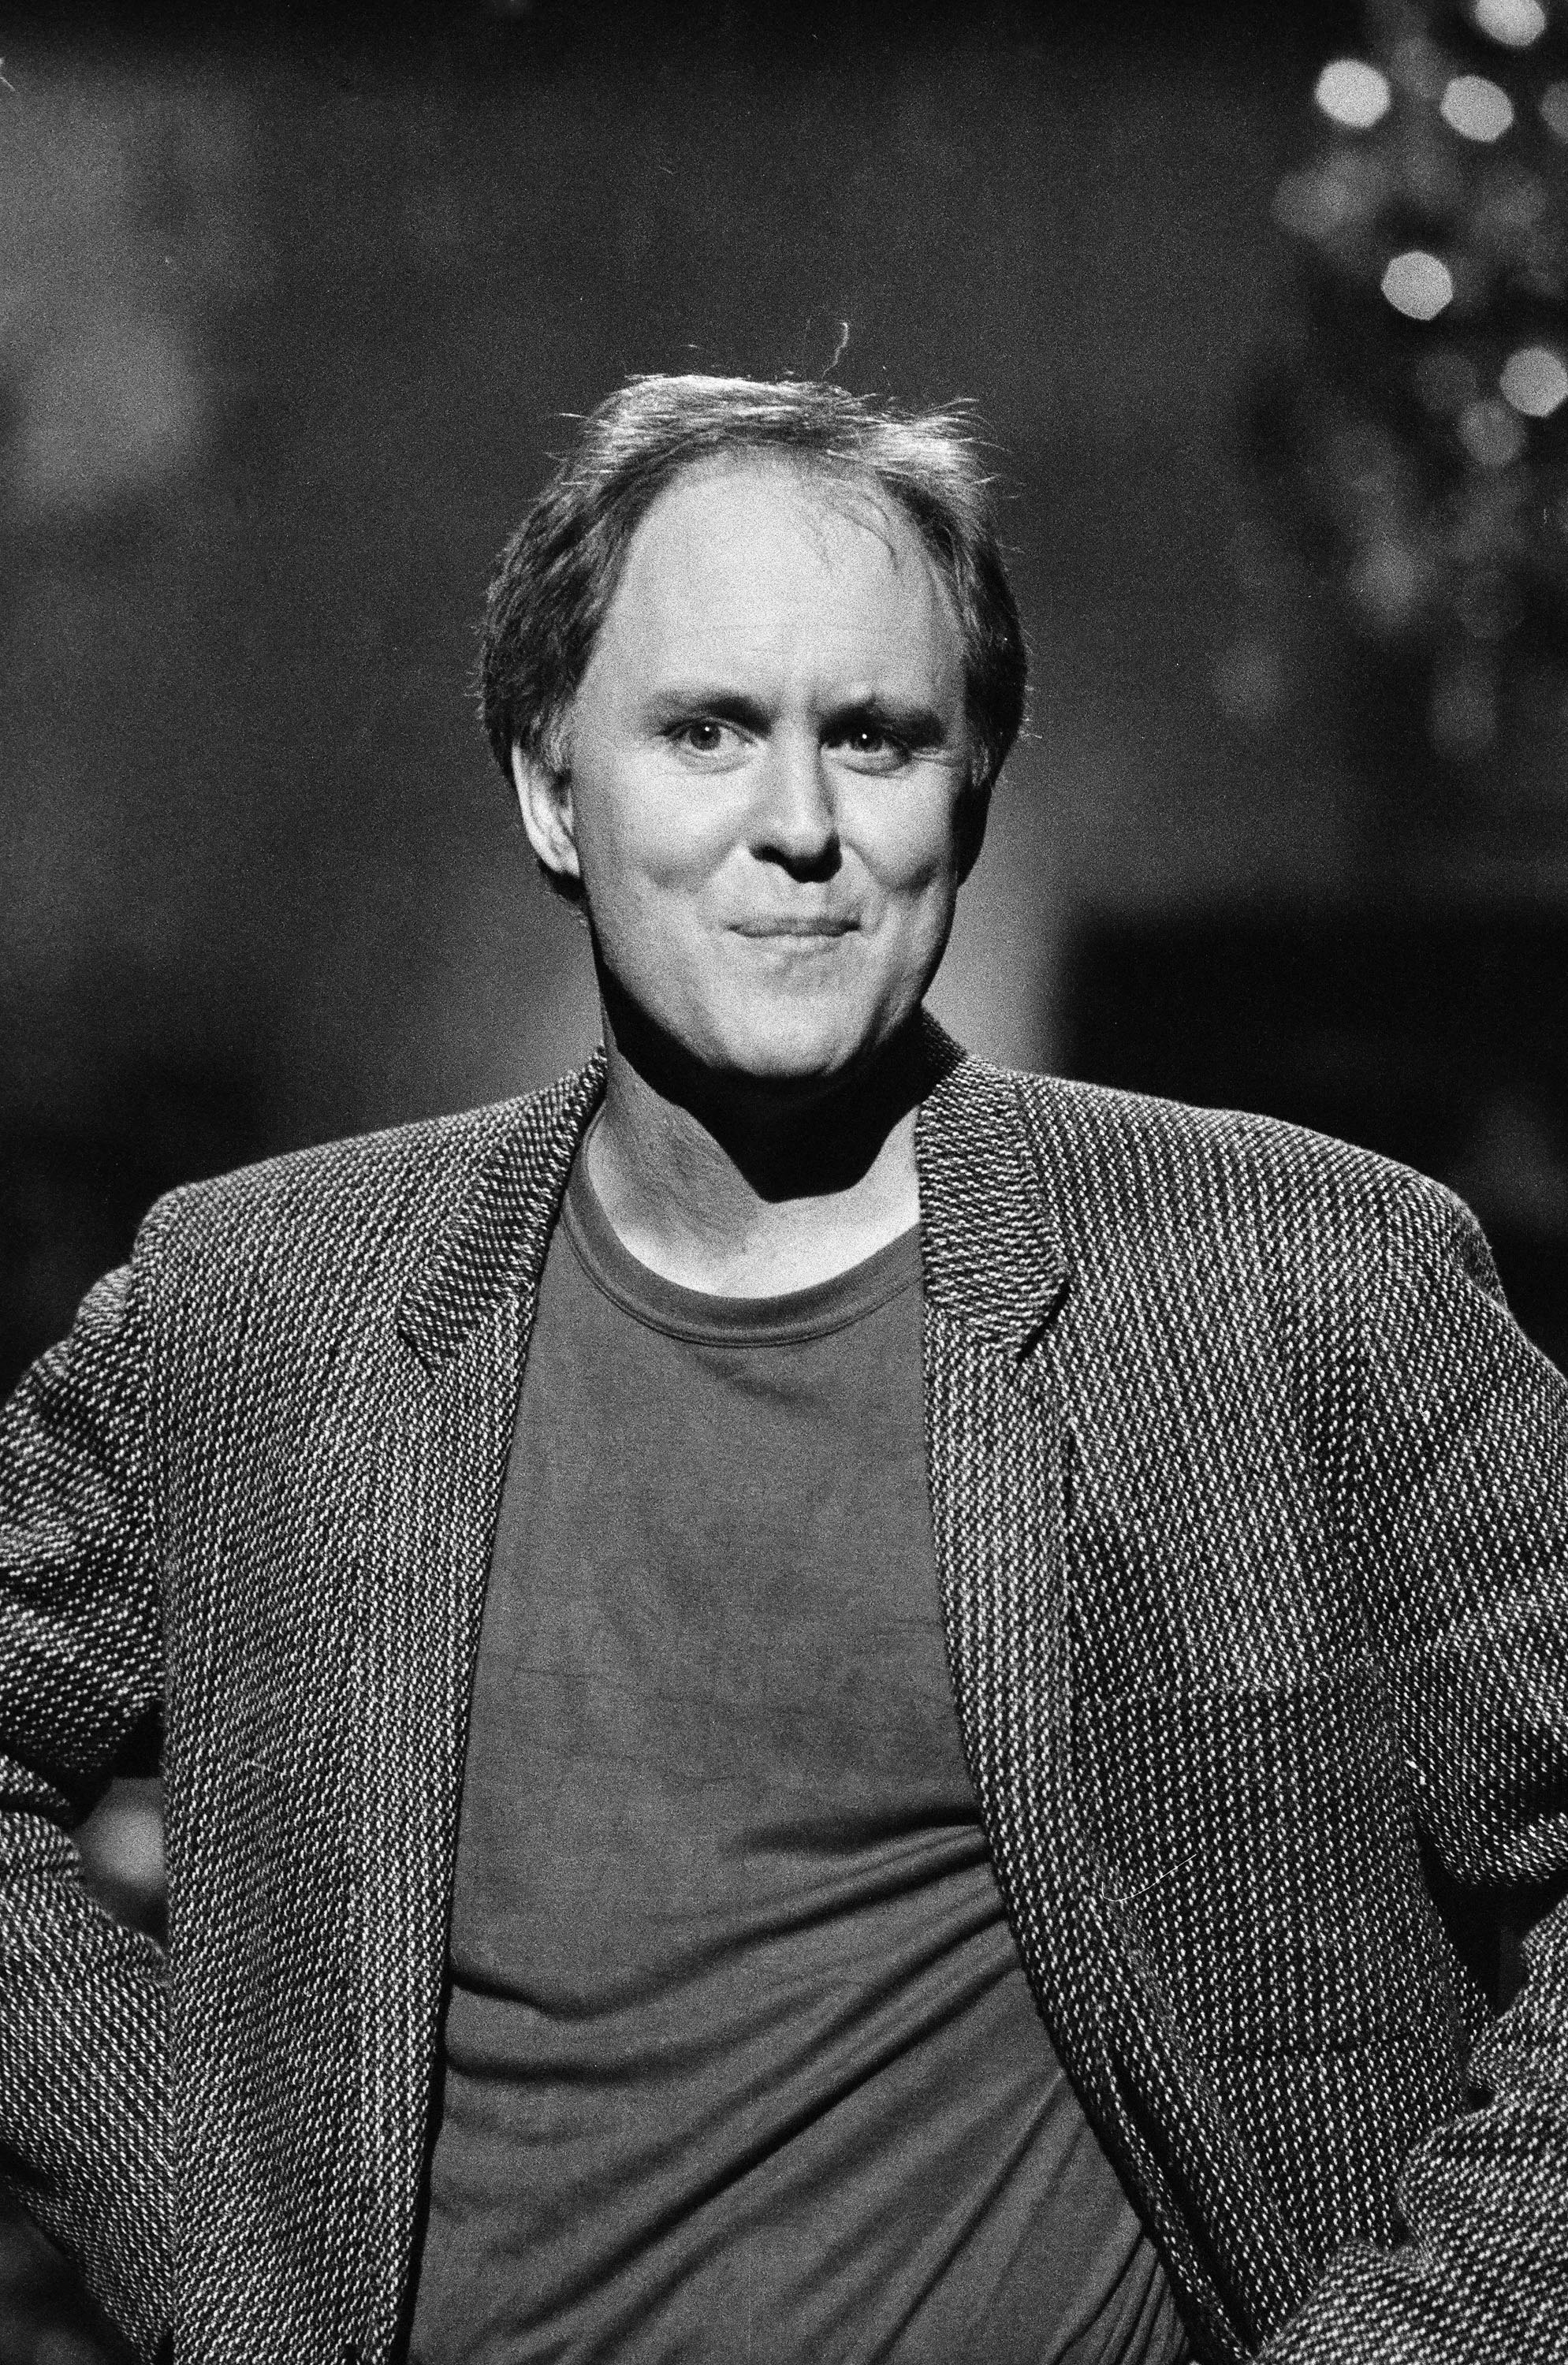 John Lithgow during the opening monologue on "Saturday Night Live" on April 11, 1987 | Source: Getty Images